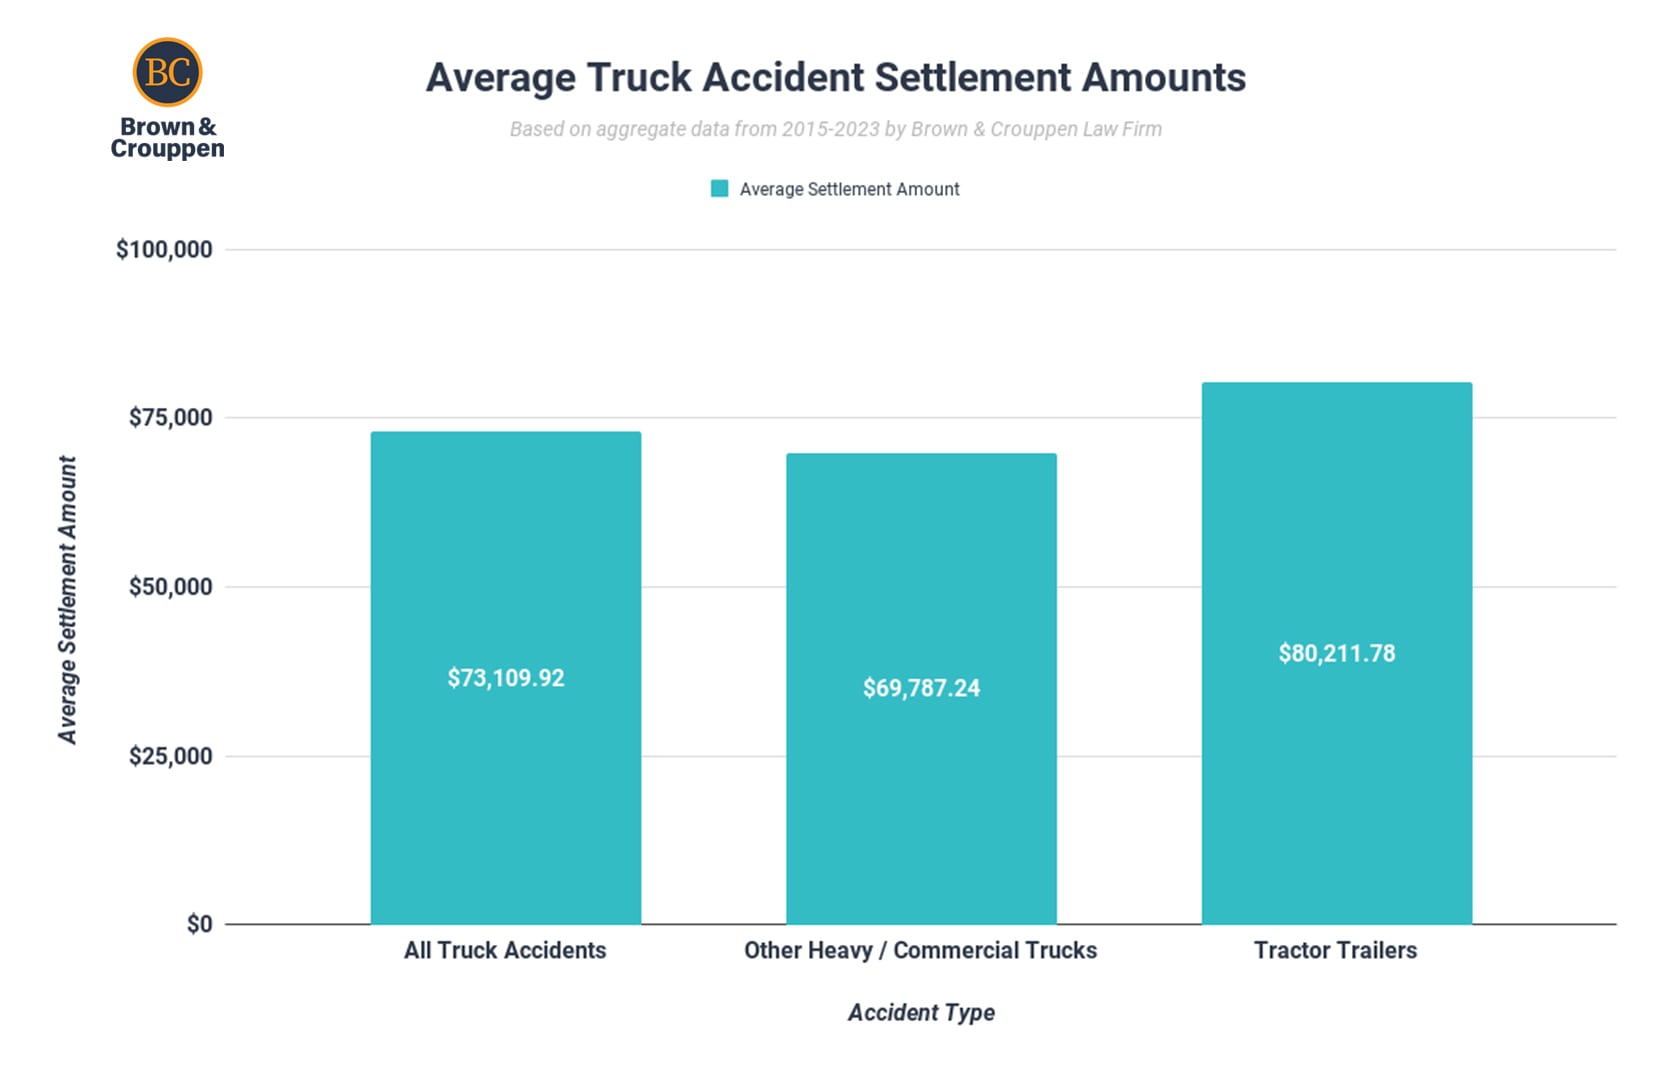 A chart showing the average truck accident settlement amount based on data from Brown & Crouppen Law Firm.